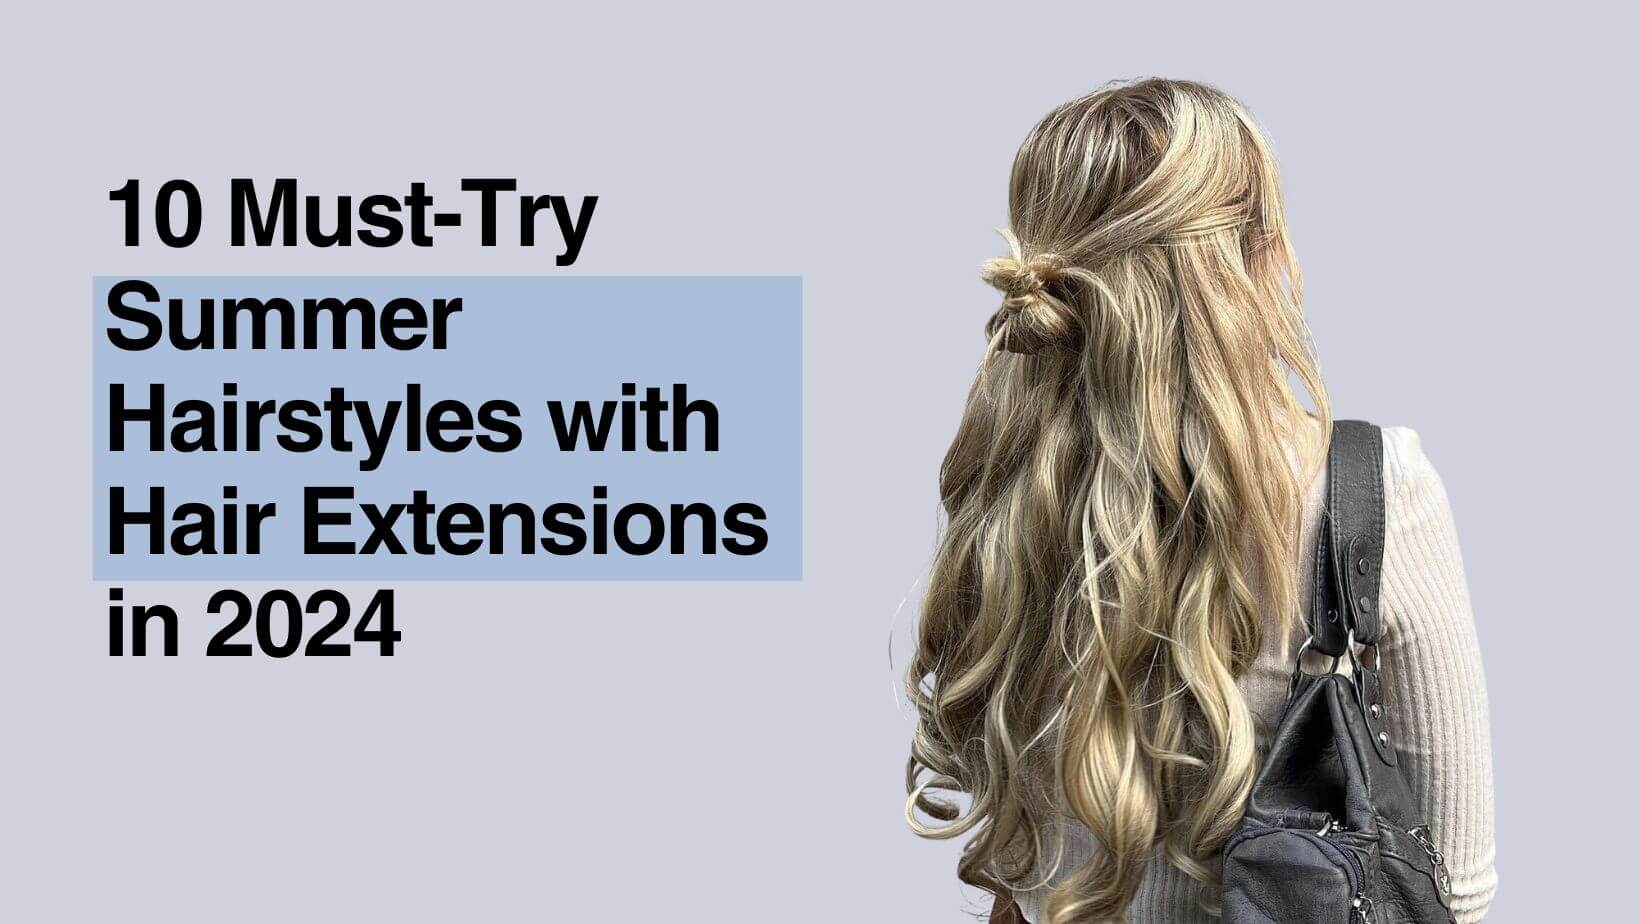 10 Must-Try Summer Hairstyles with Hair Extensions in 2024